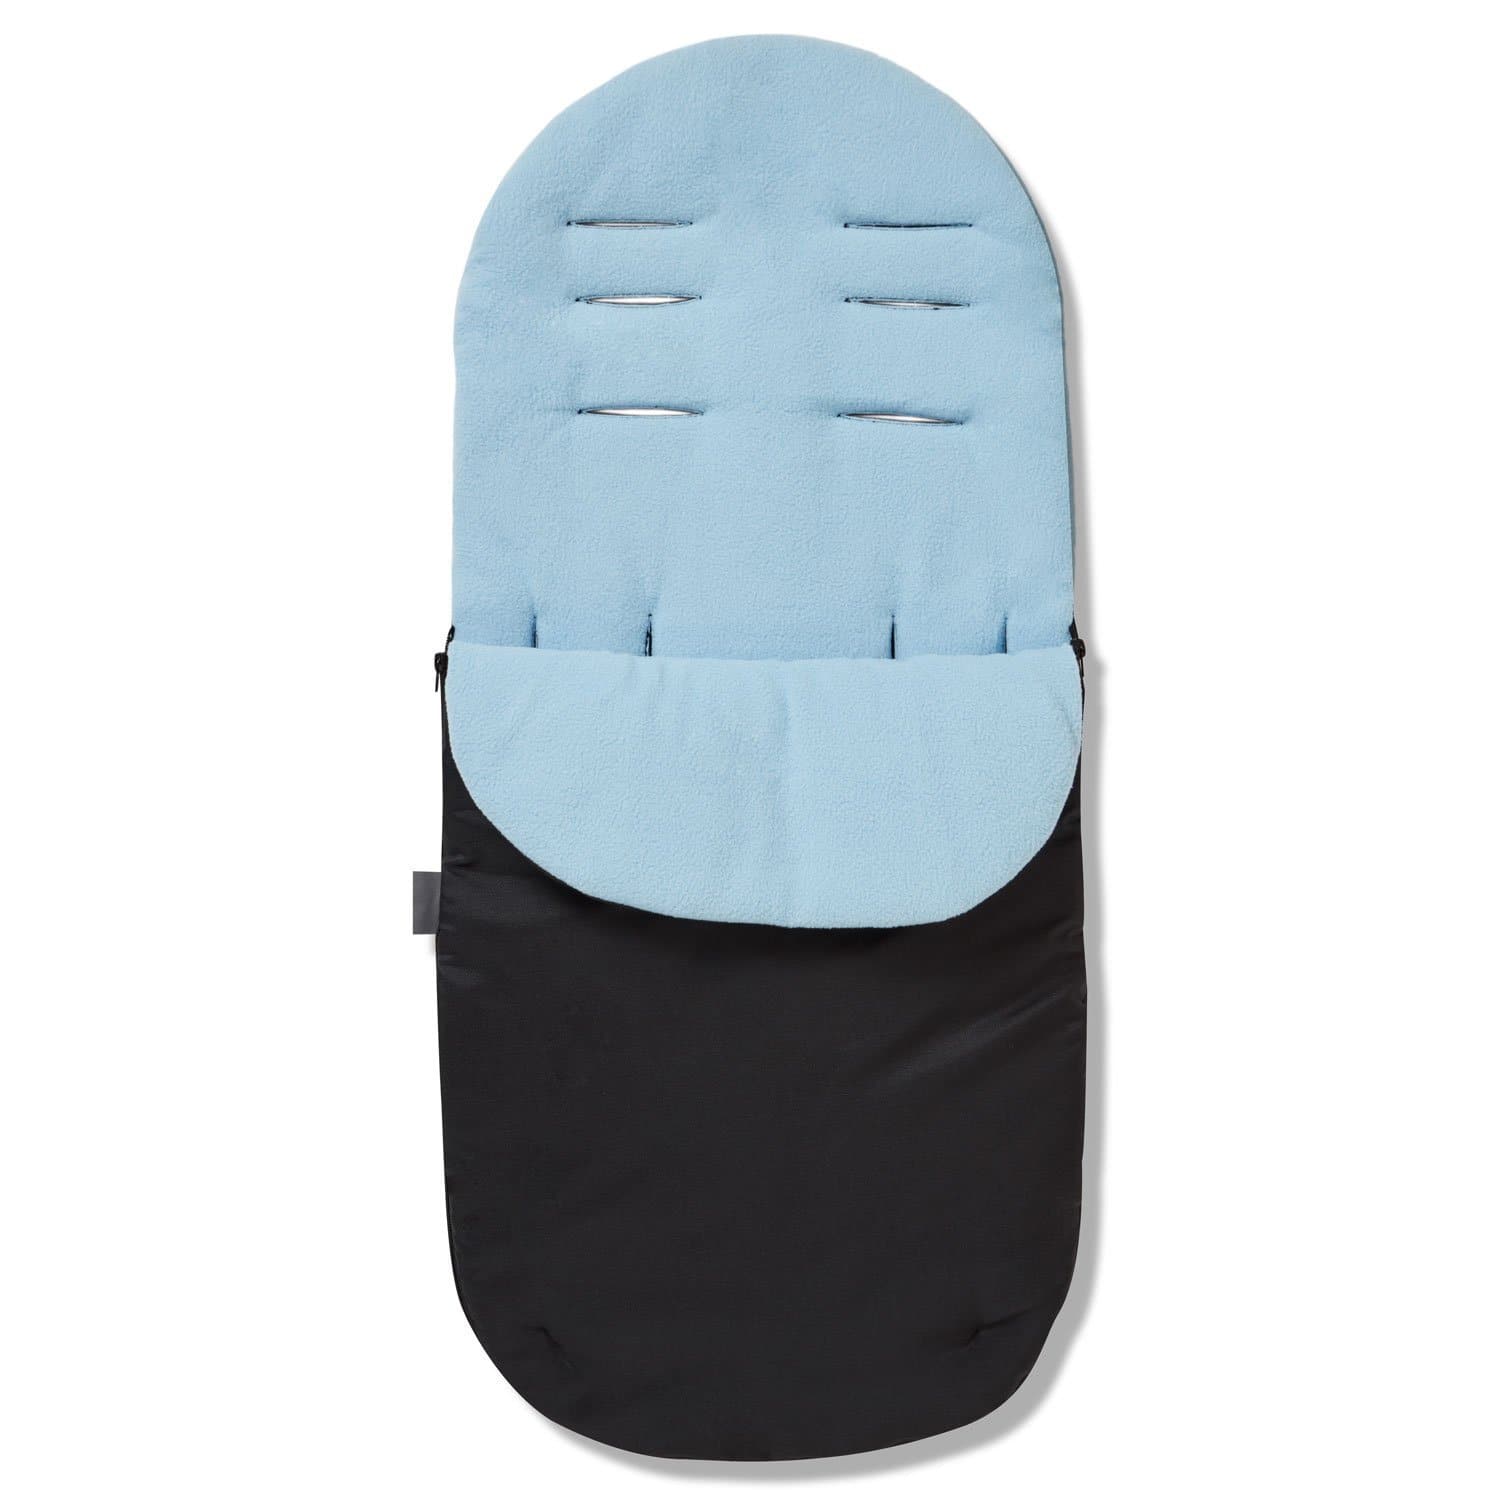 Footmuff / Cosy Toes Compatible with Chicco - Light Blue / Fits All Models | For Your Little One